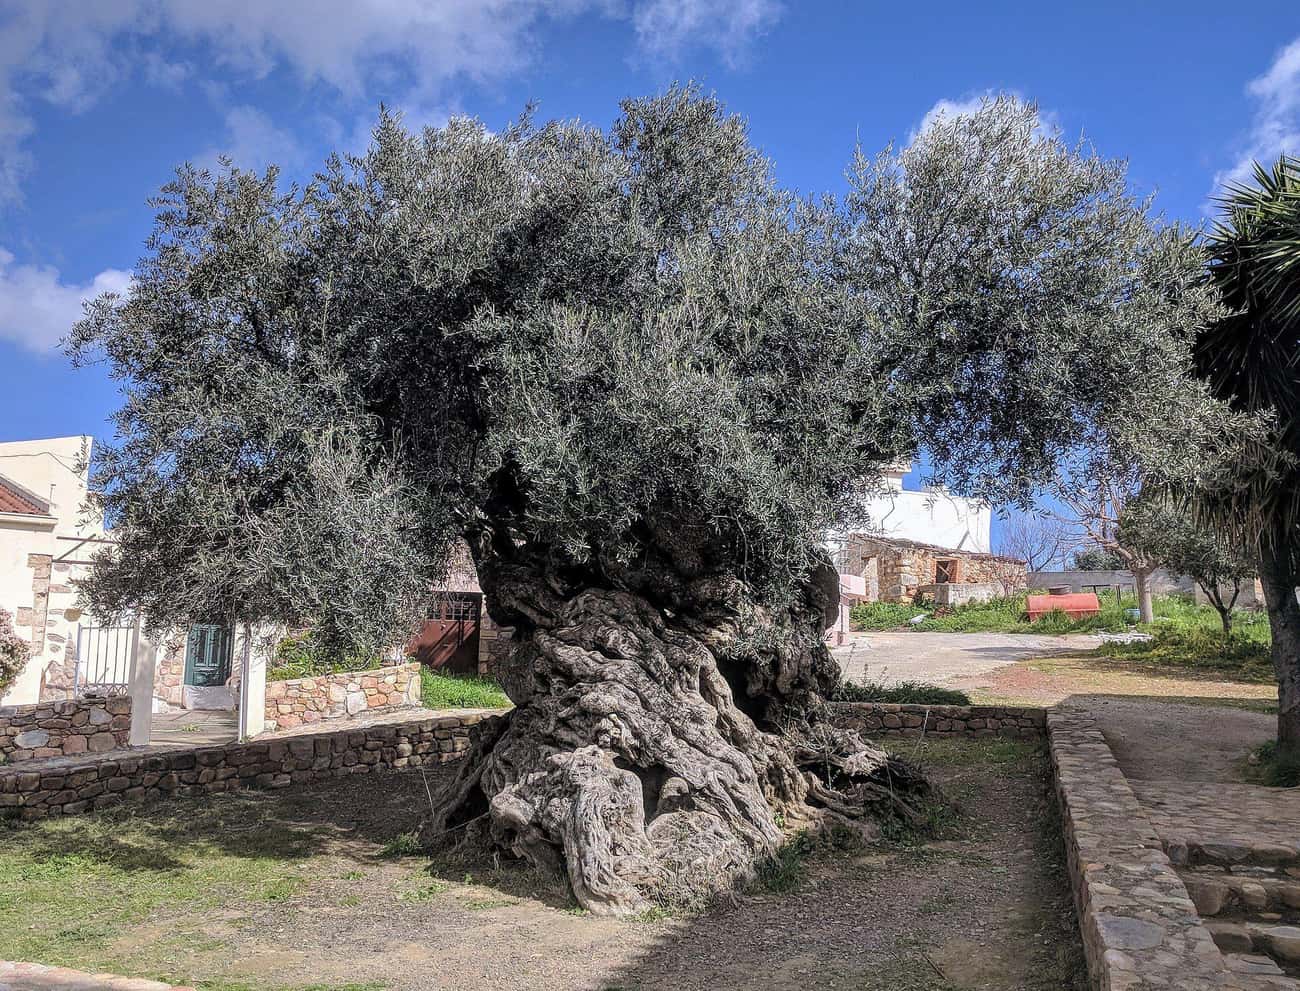 A 2,000-Year-Old Olive Tree In Greece That Still Produces Olives фото знания